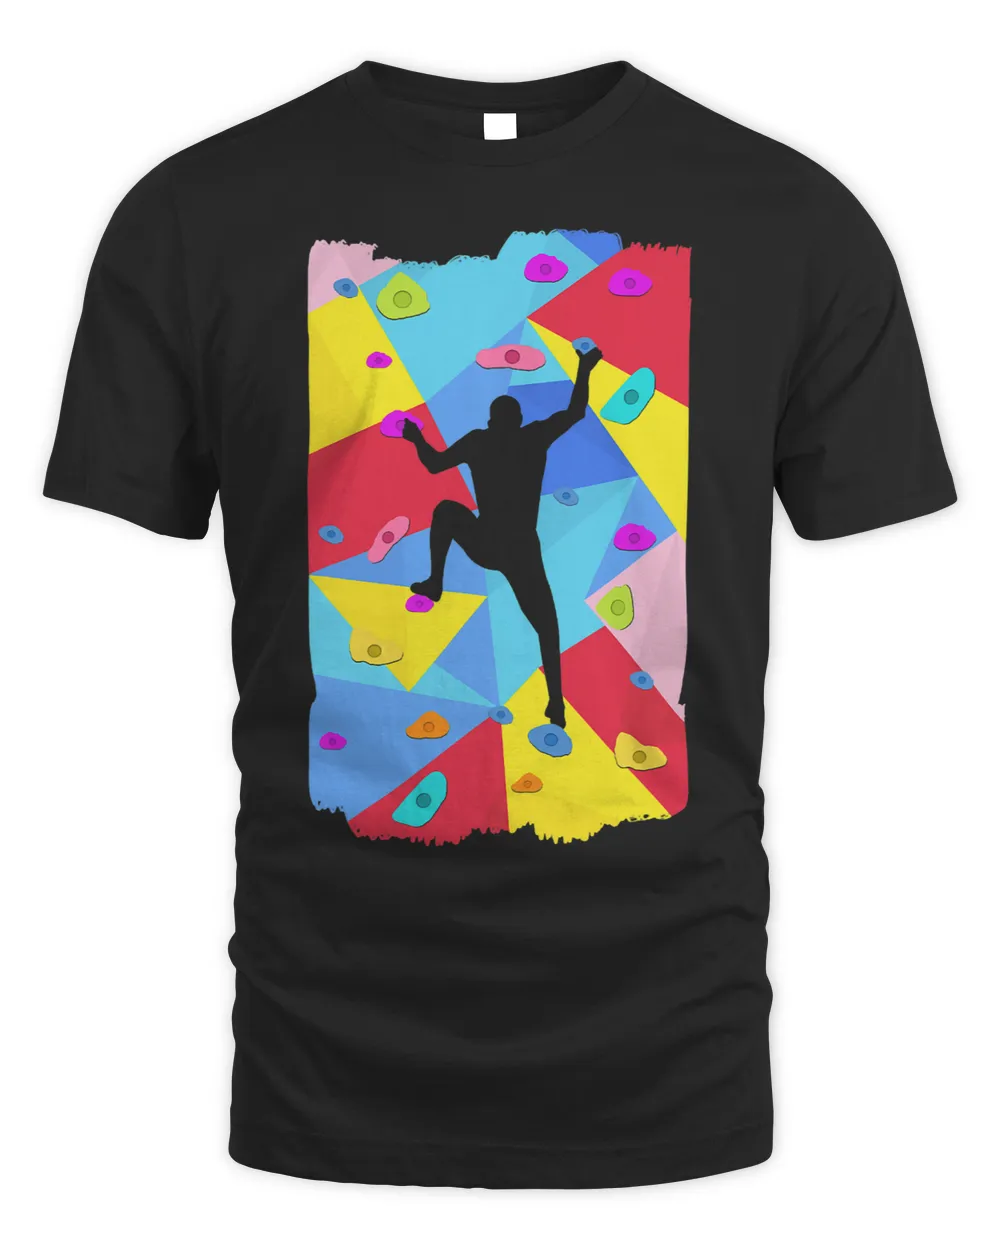 Bouldering Climber Abstract Free Climbing Rock Formation